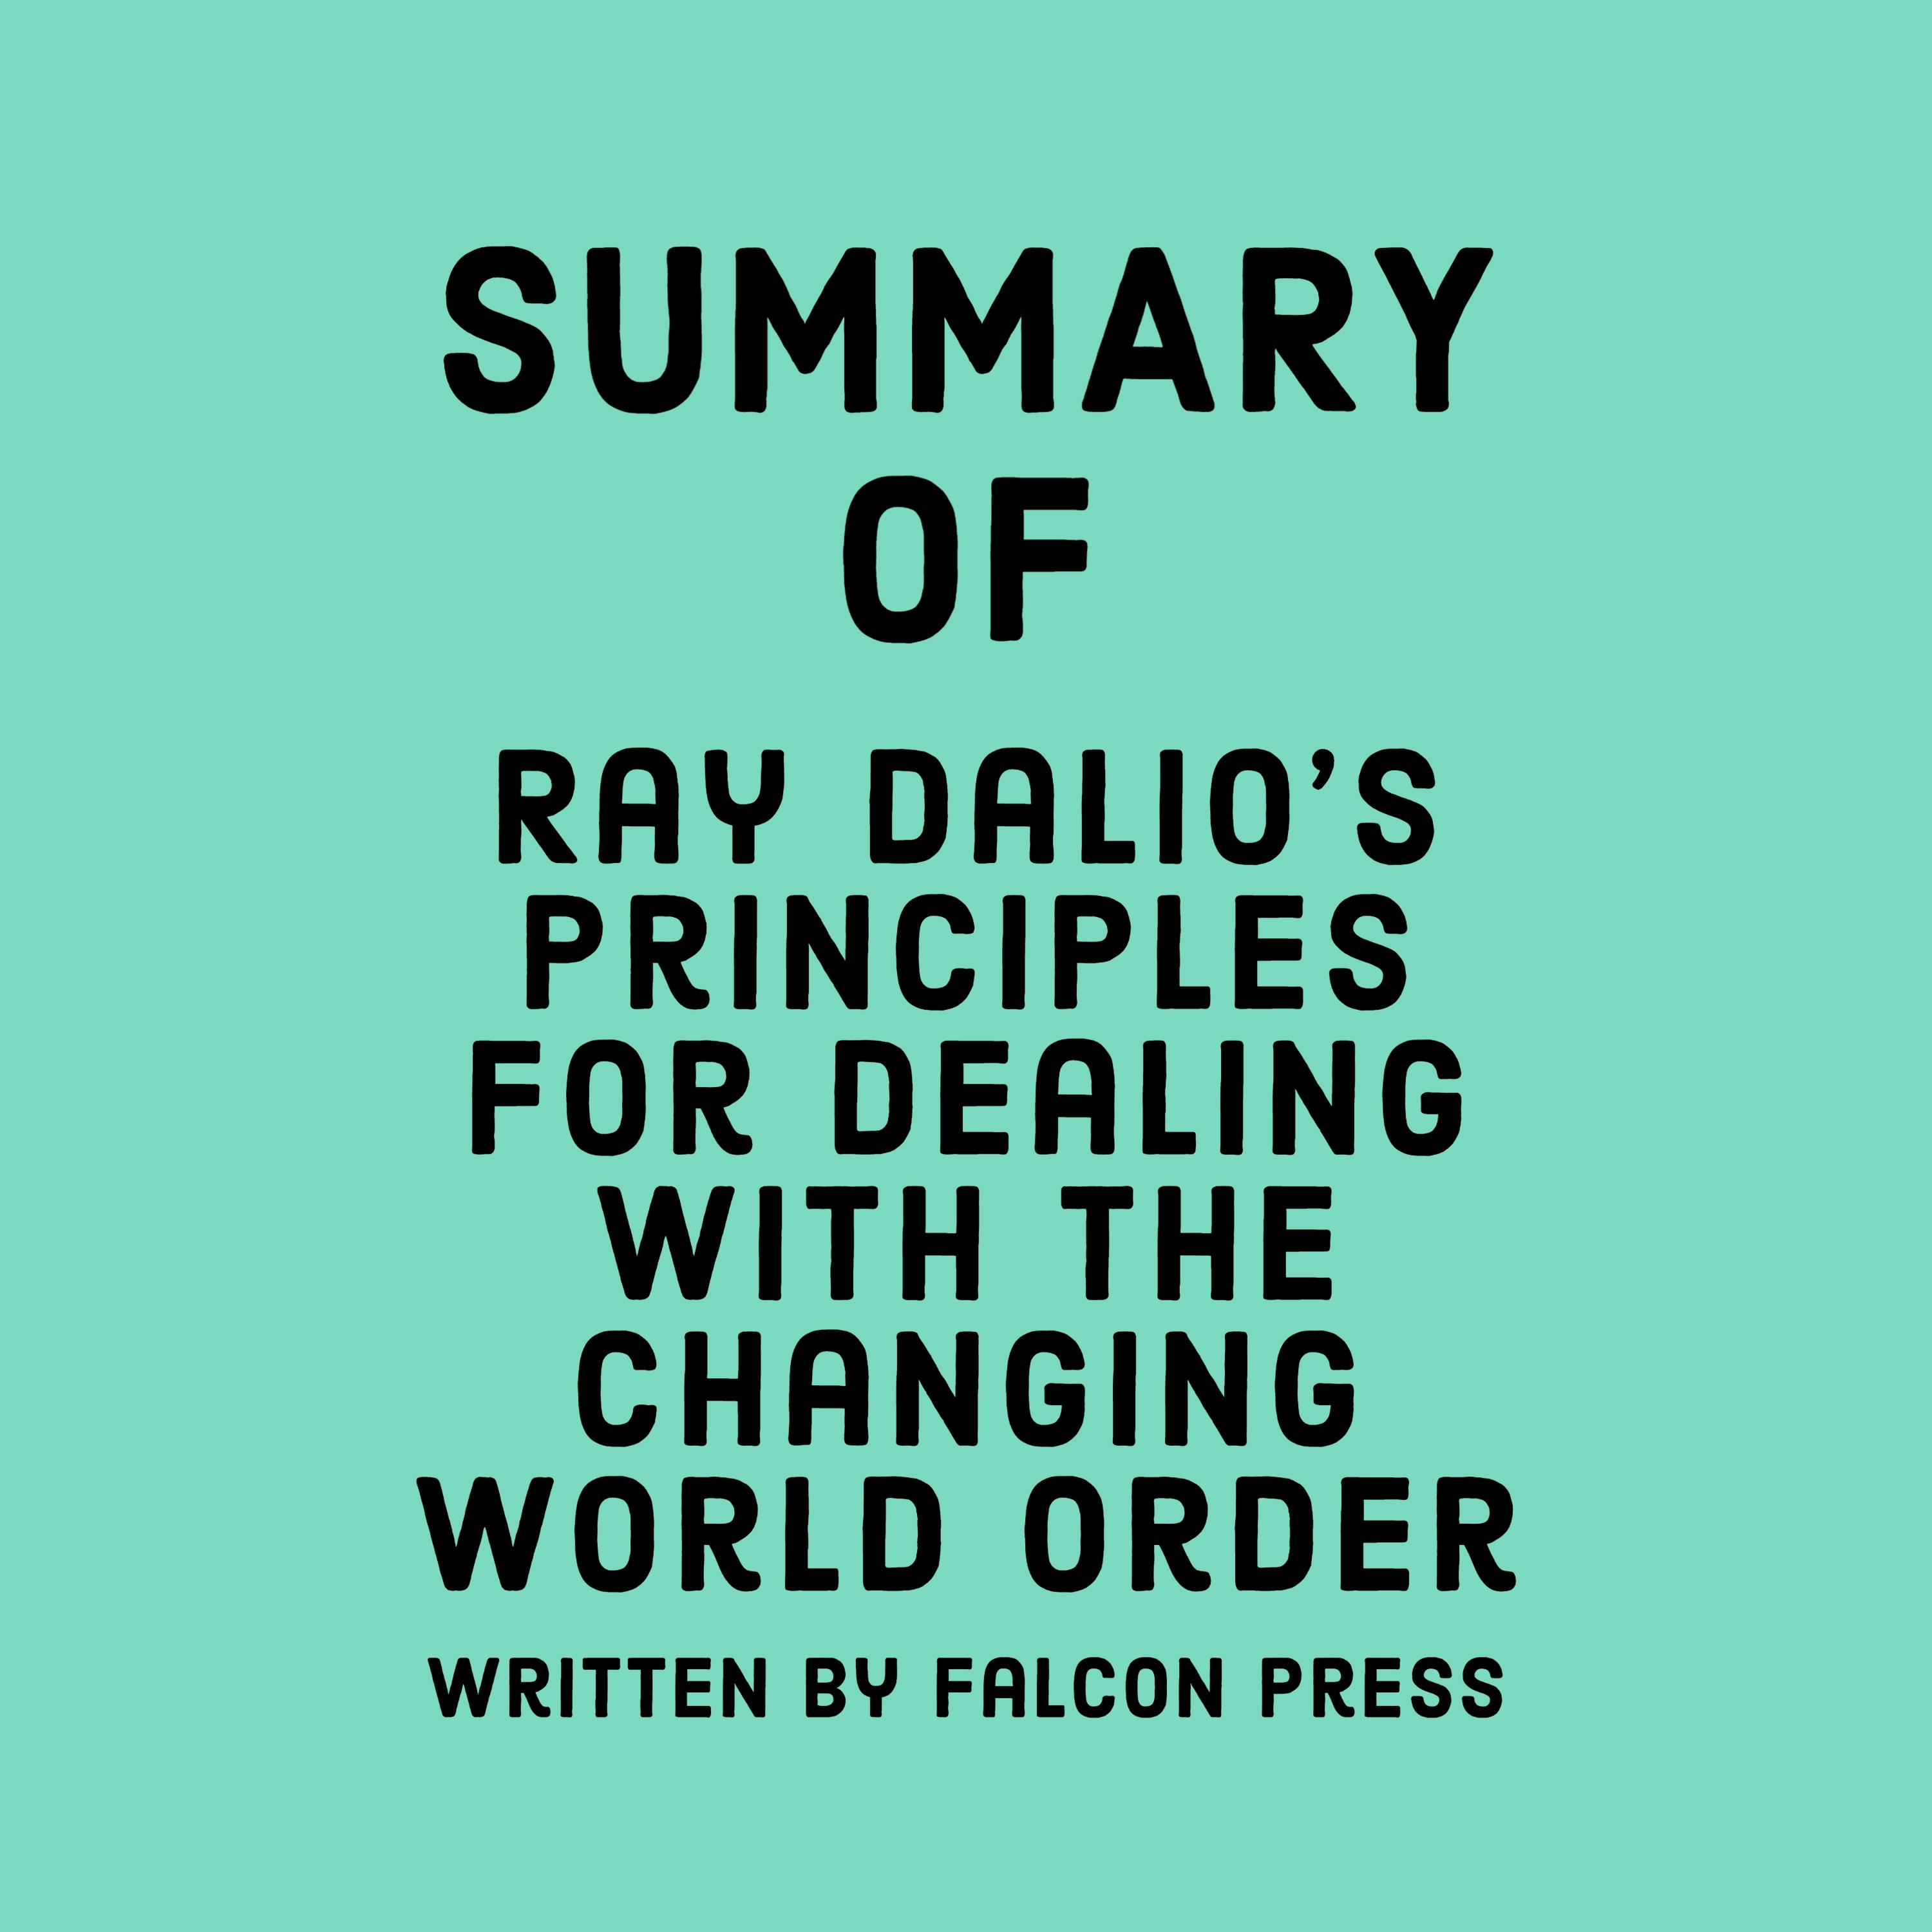 ray dalio principles for changing world order